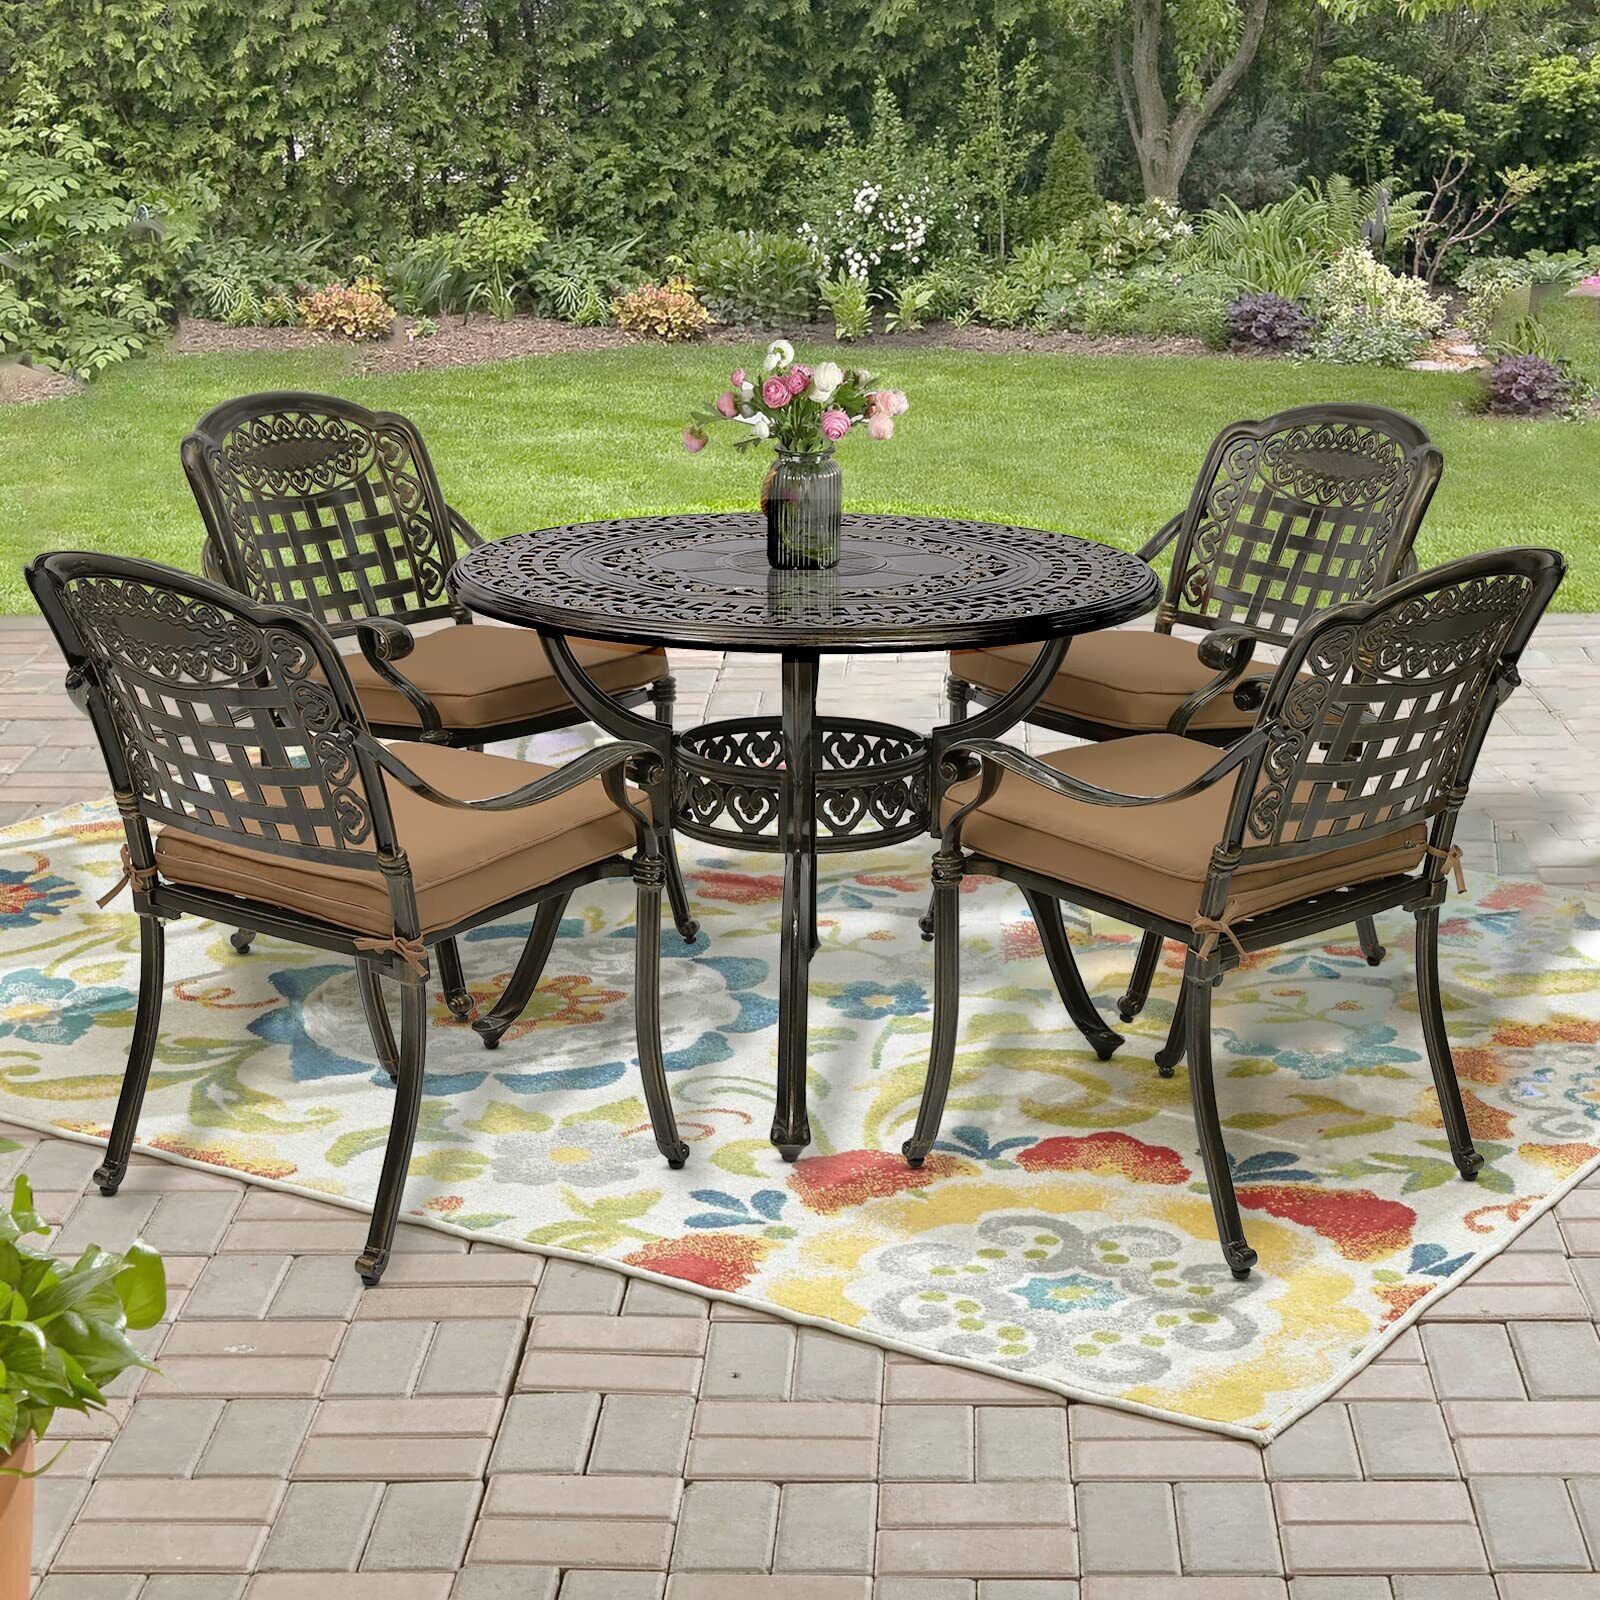 5 Piece Outdoor Patio Dining Set Cast Aluminum Includes 4 Chairs, 1 Round  Table | Ebay Inside 5 Piece Outdoor Patio Furniture Set (View 8 of 15)